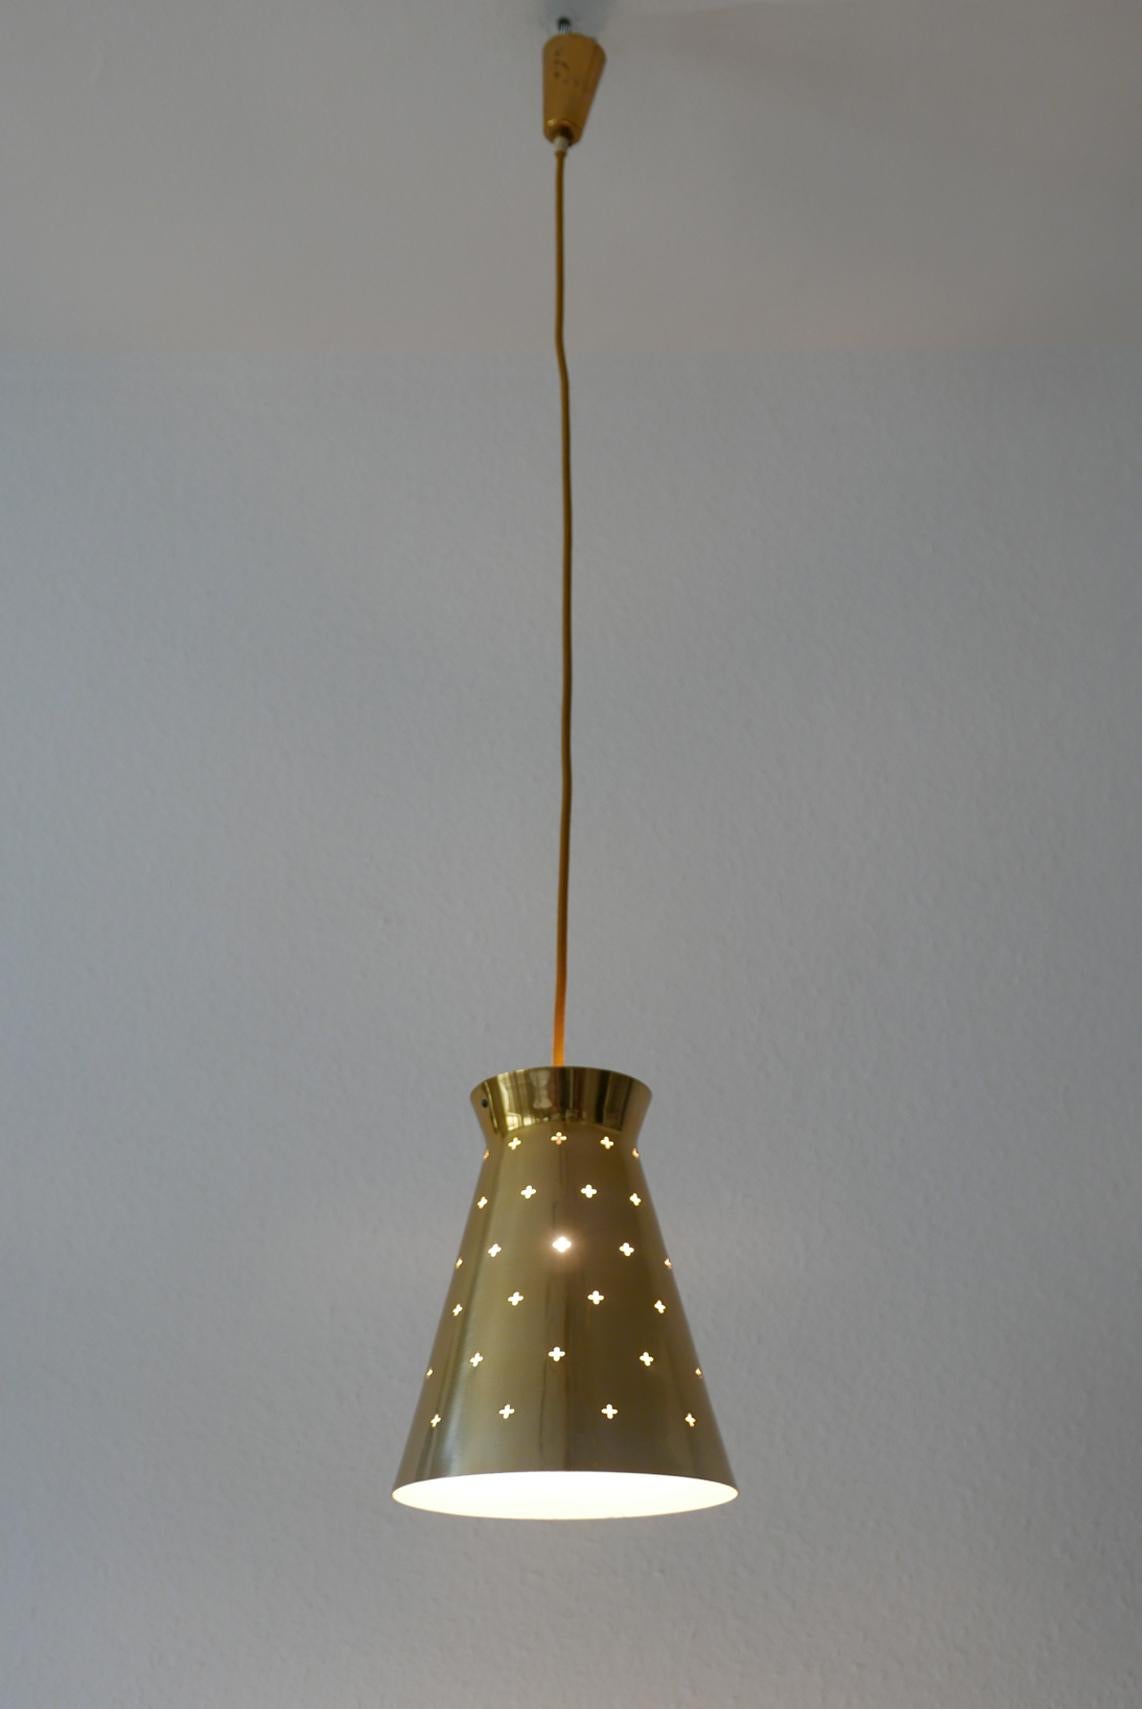 Mid-20th Century Lovely Mid-Century Modern Diabolo Pendant Lamp by Hillebrand, 1950s, Germany For Sale